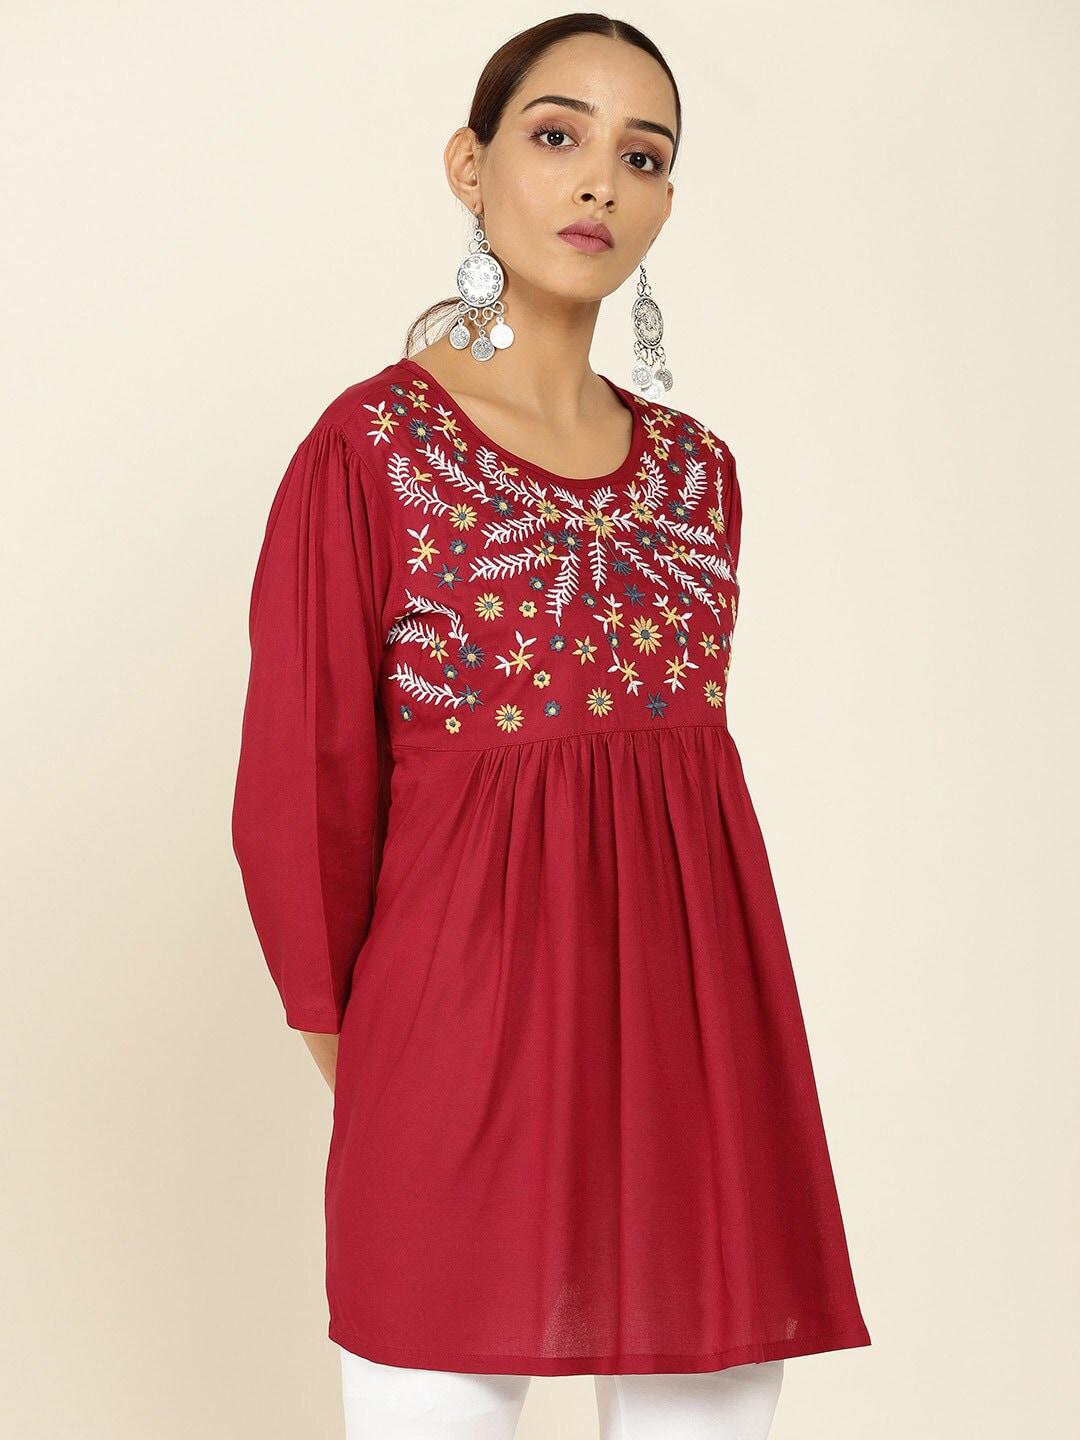 soch maroon & white viscose rayon embroidered tunic